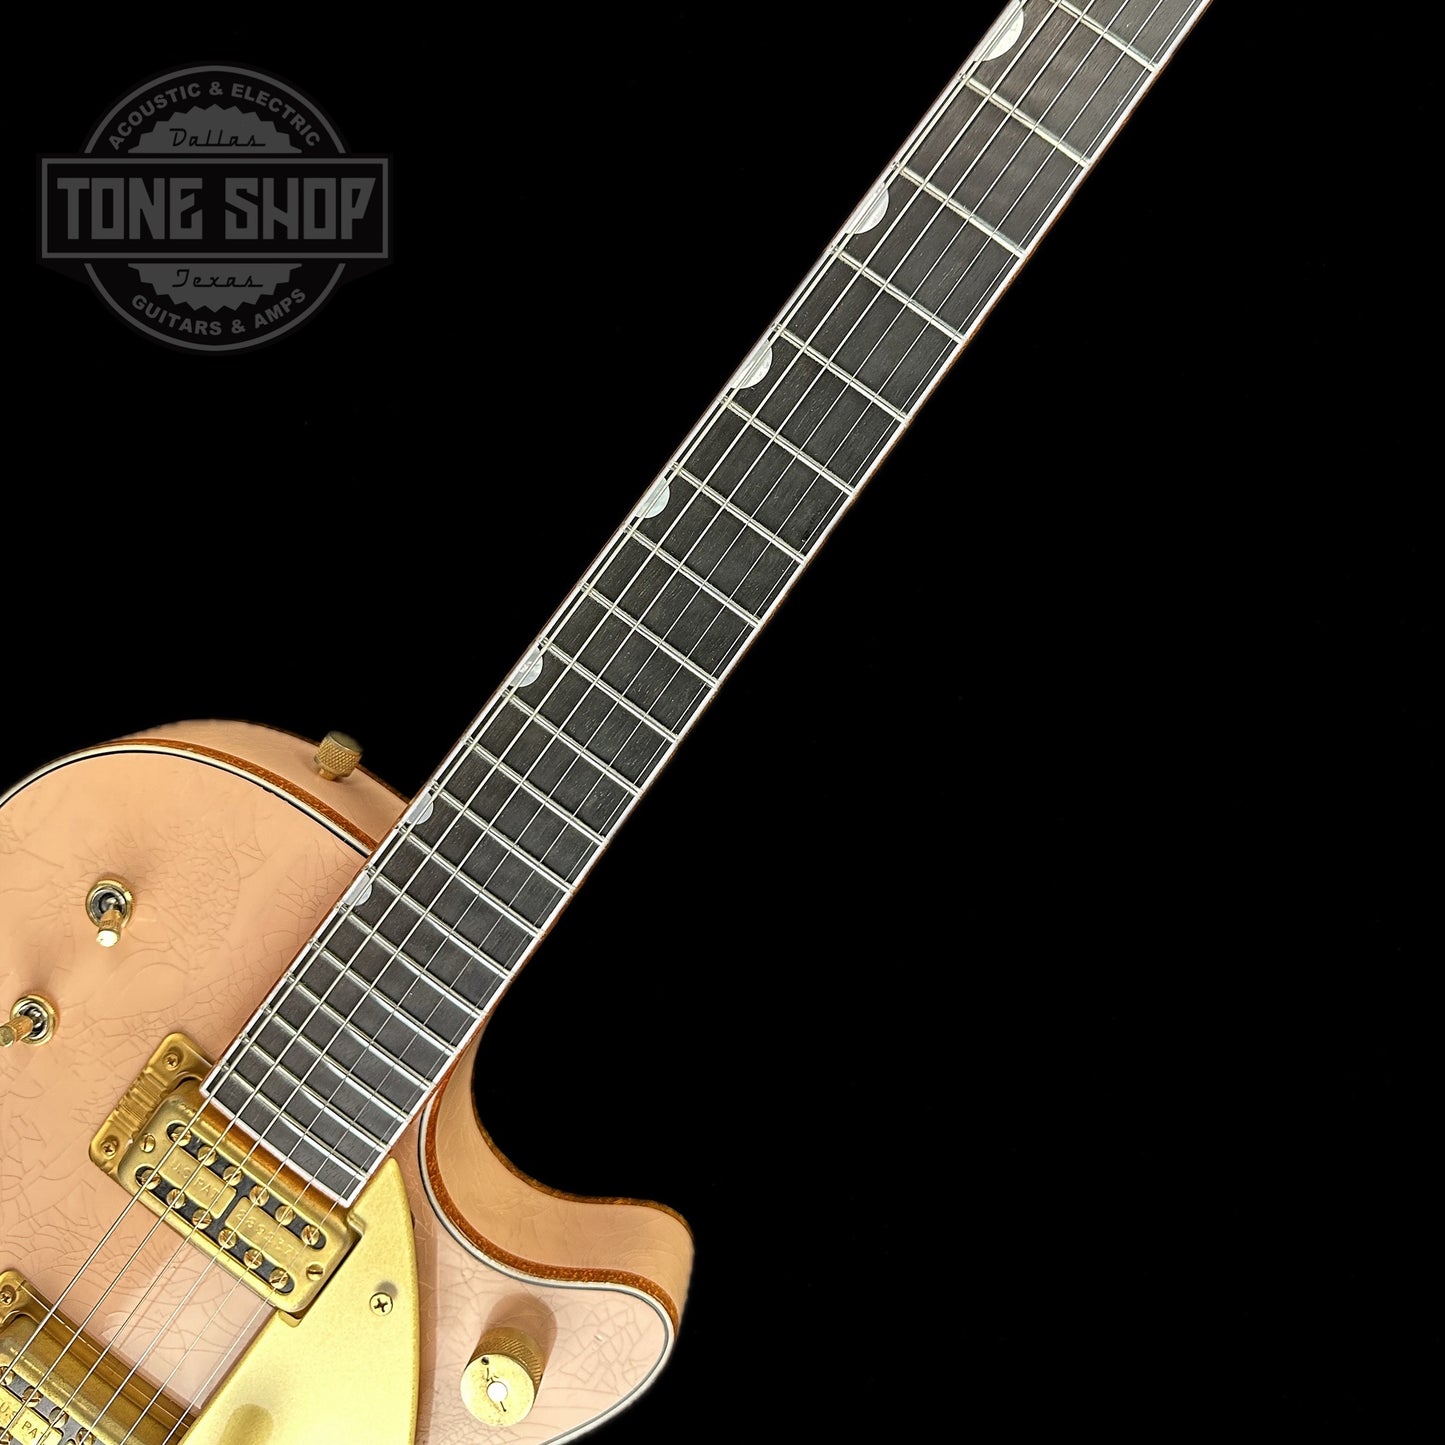 Fretboard of Gretsch Custom Shop G6134-59 Penguin Relic Shell Pink Masterbuilt By Gonzalo Madrigal.